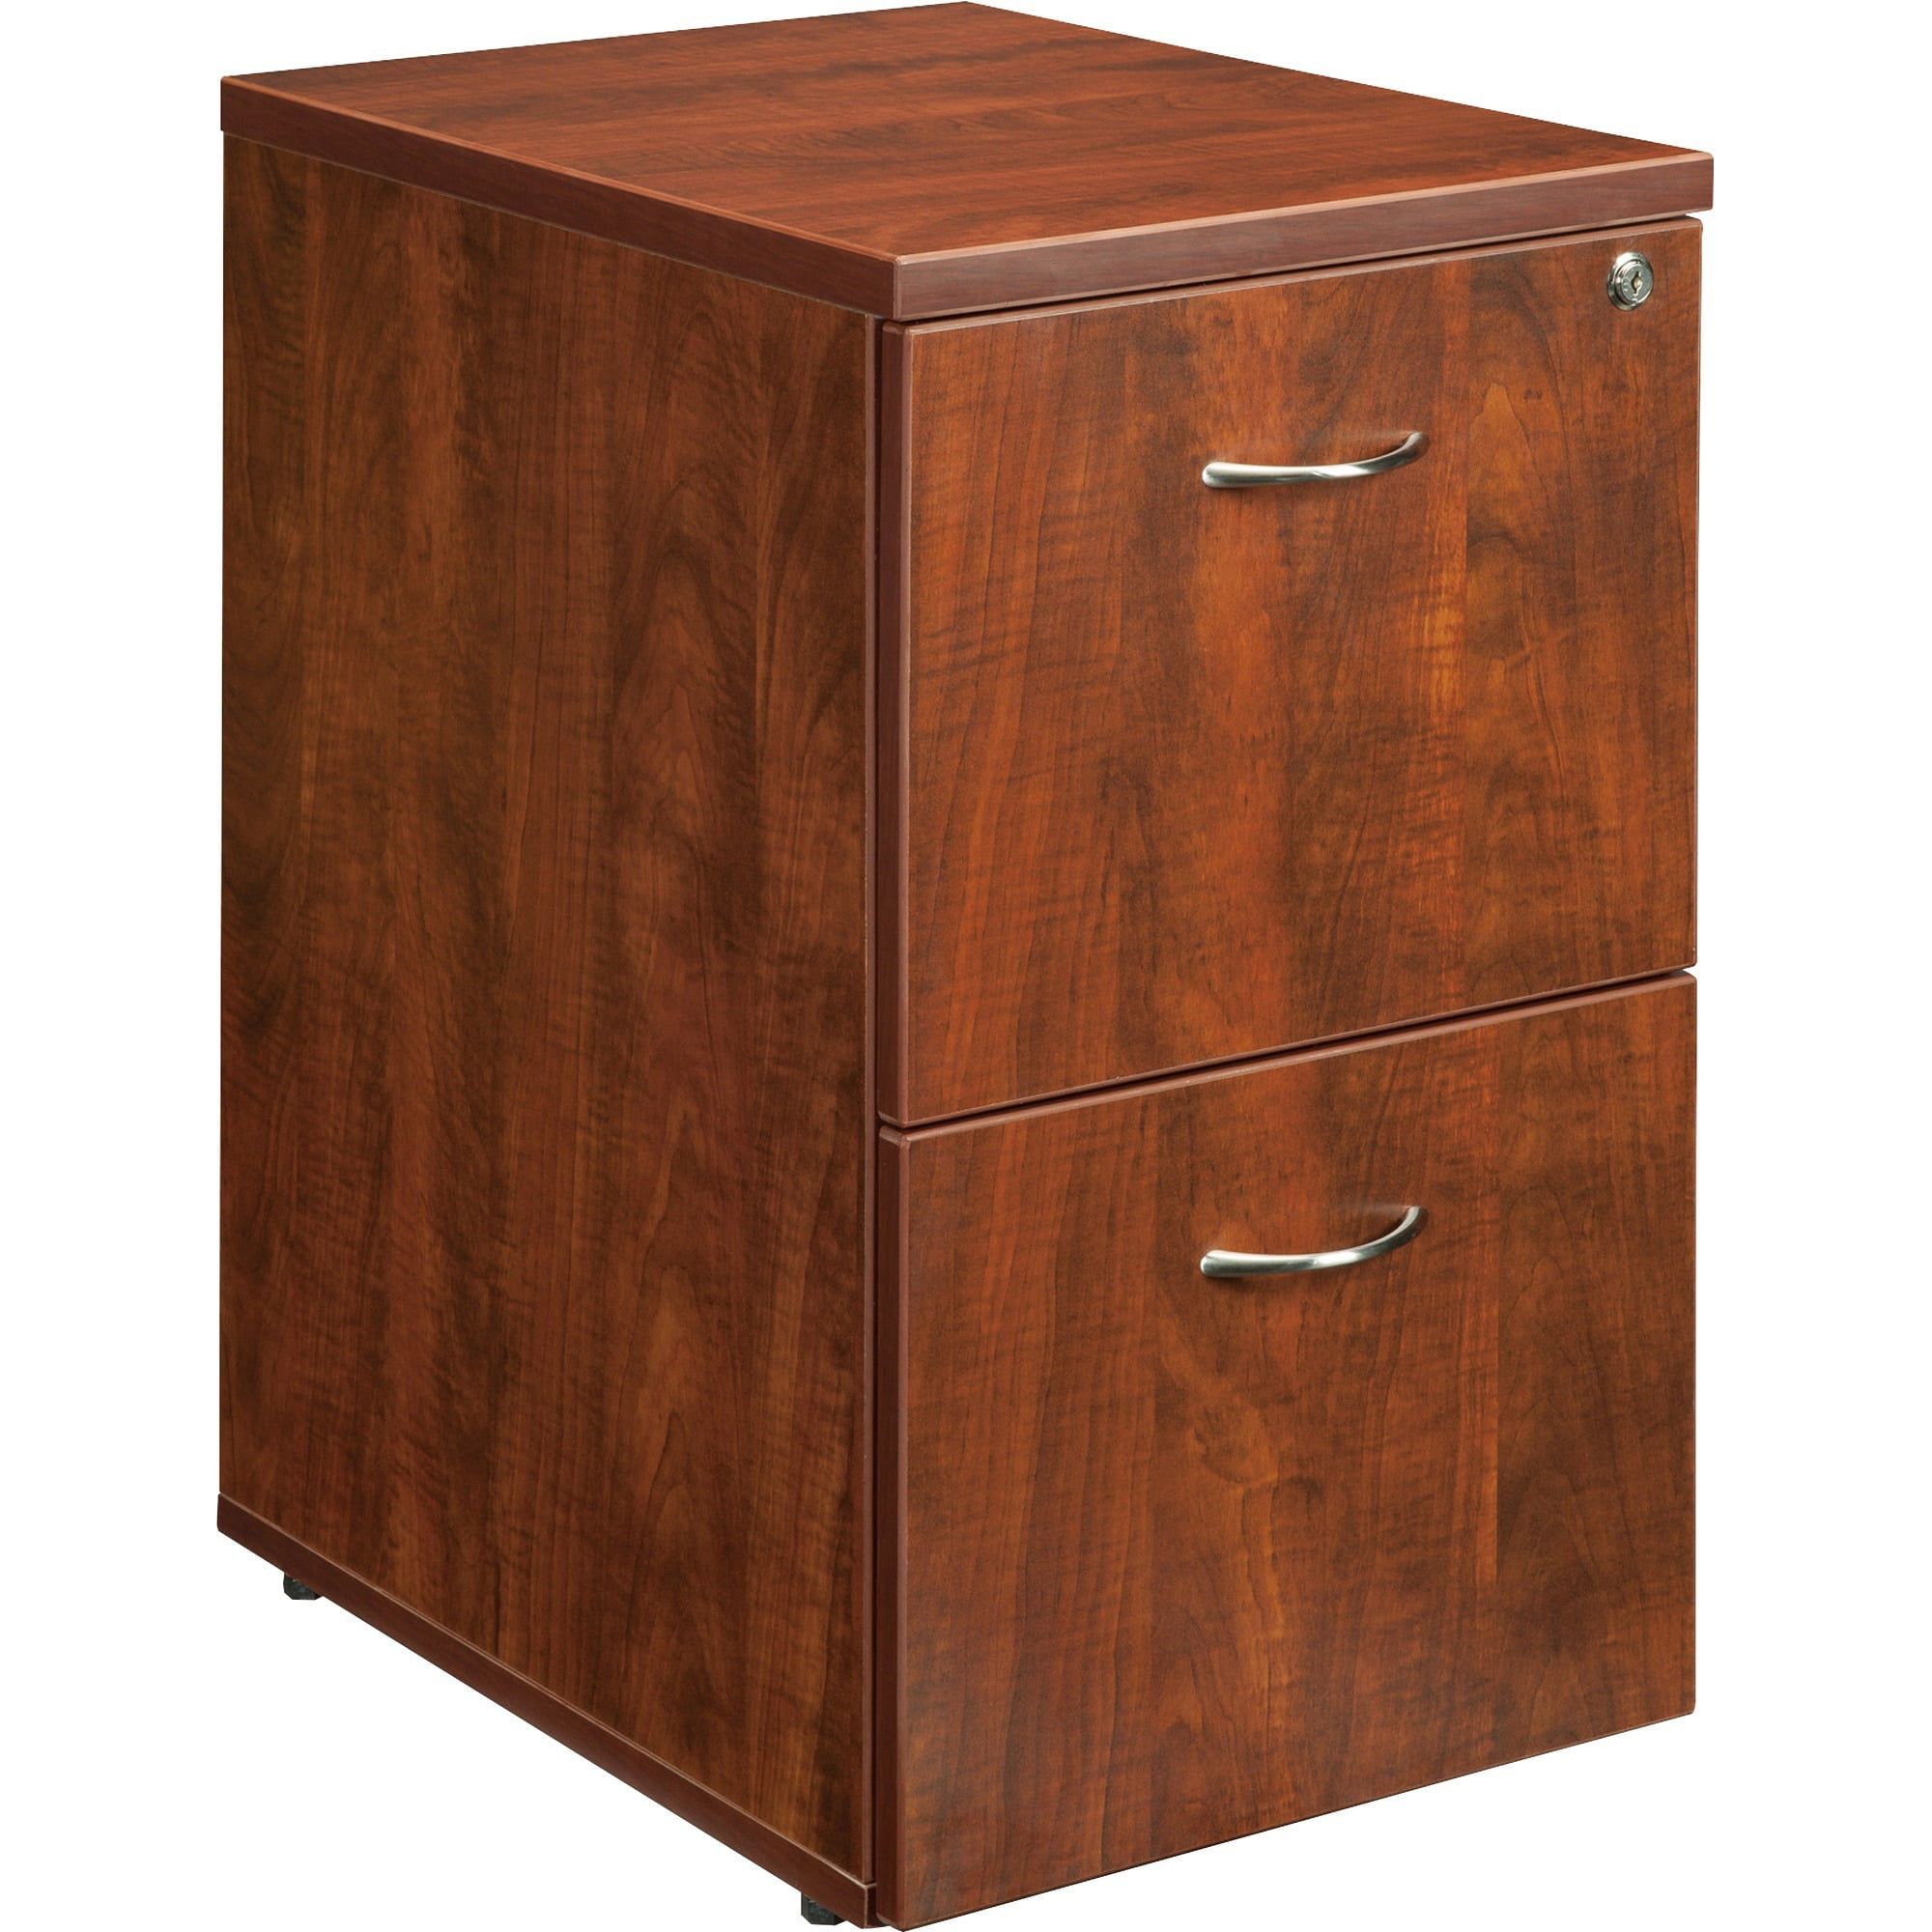 2 Drawers Vertical Wood Composite Lockable Filing Cabinet, Cherry Regarding Wood Cabinet With Drawers (View 2 of 20)